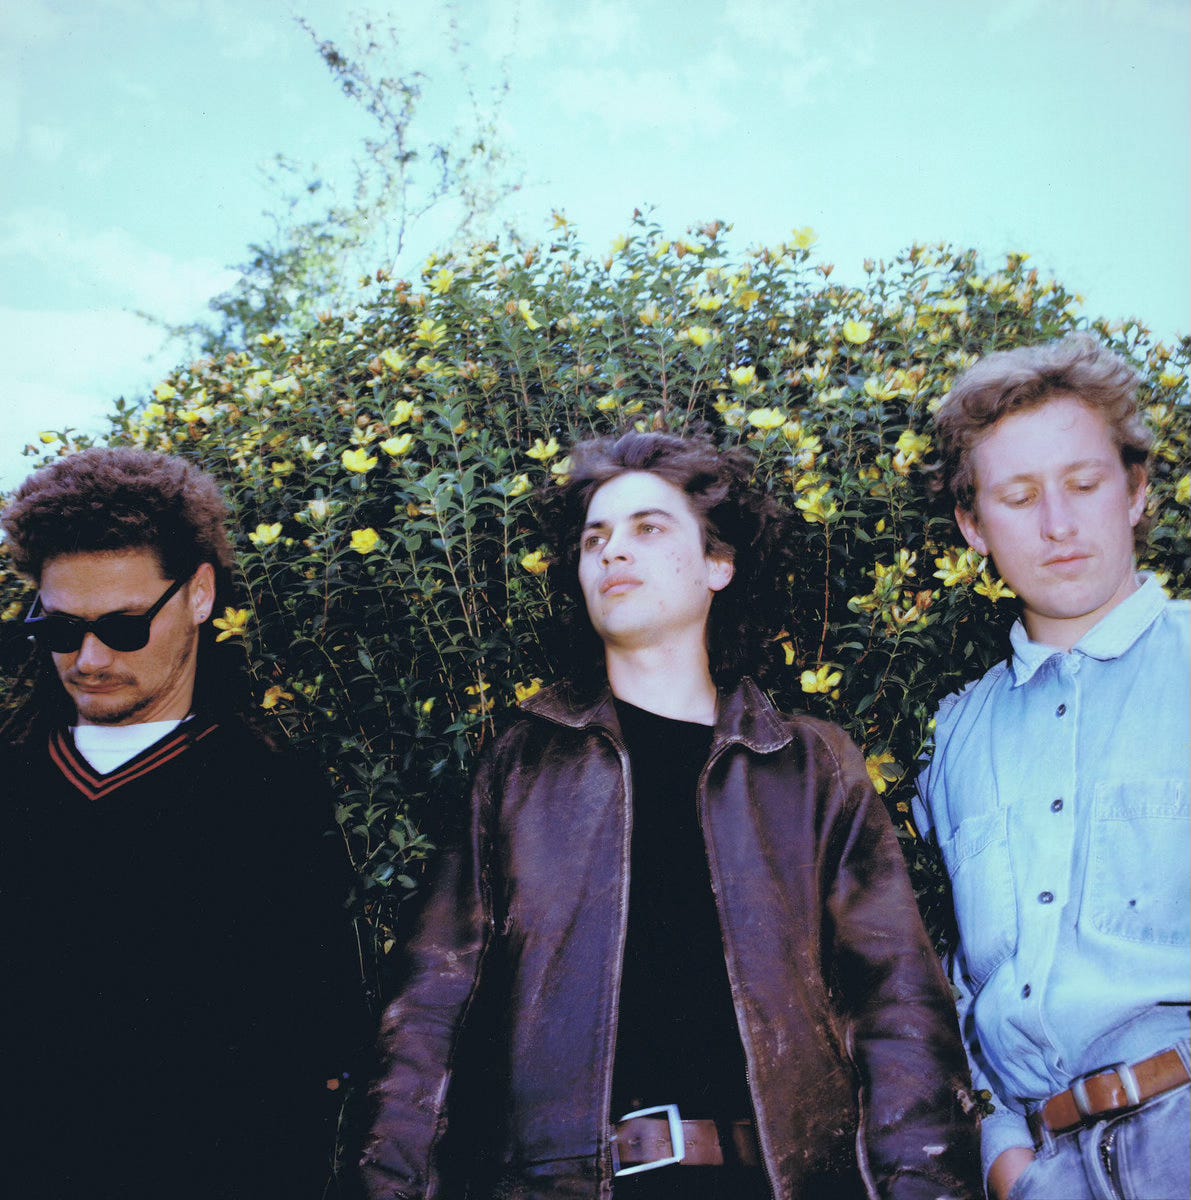 cool-toned film photo of three mid-20s-ish dudes (the band Stephen) in front of a tall, yellow-flowered bush